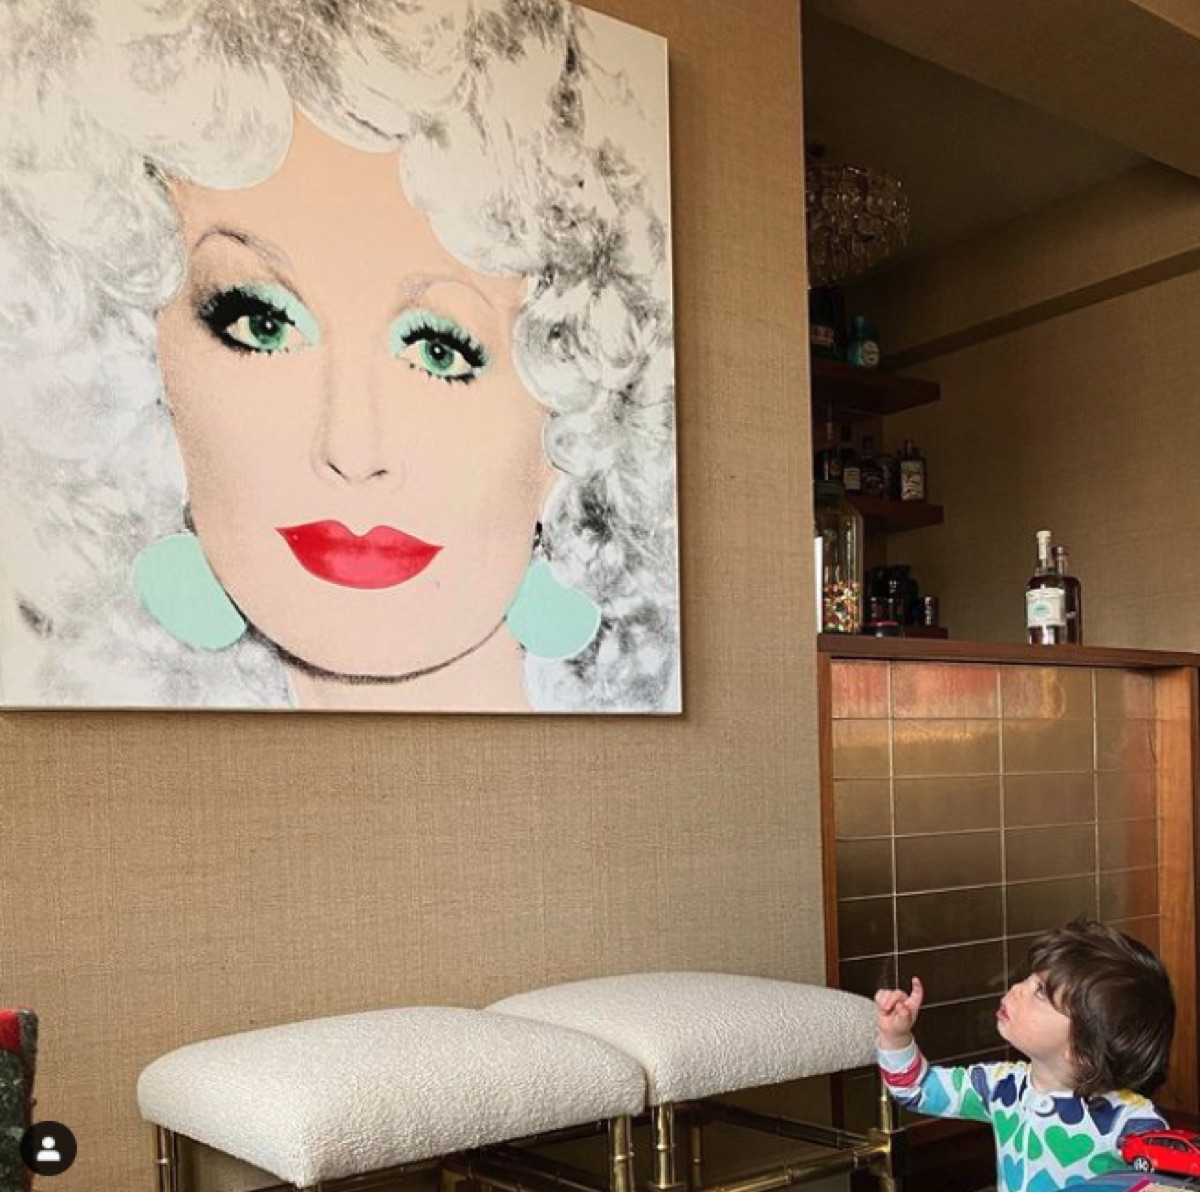 Andy Cohen's son looking at Dolly Parton painting